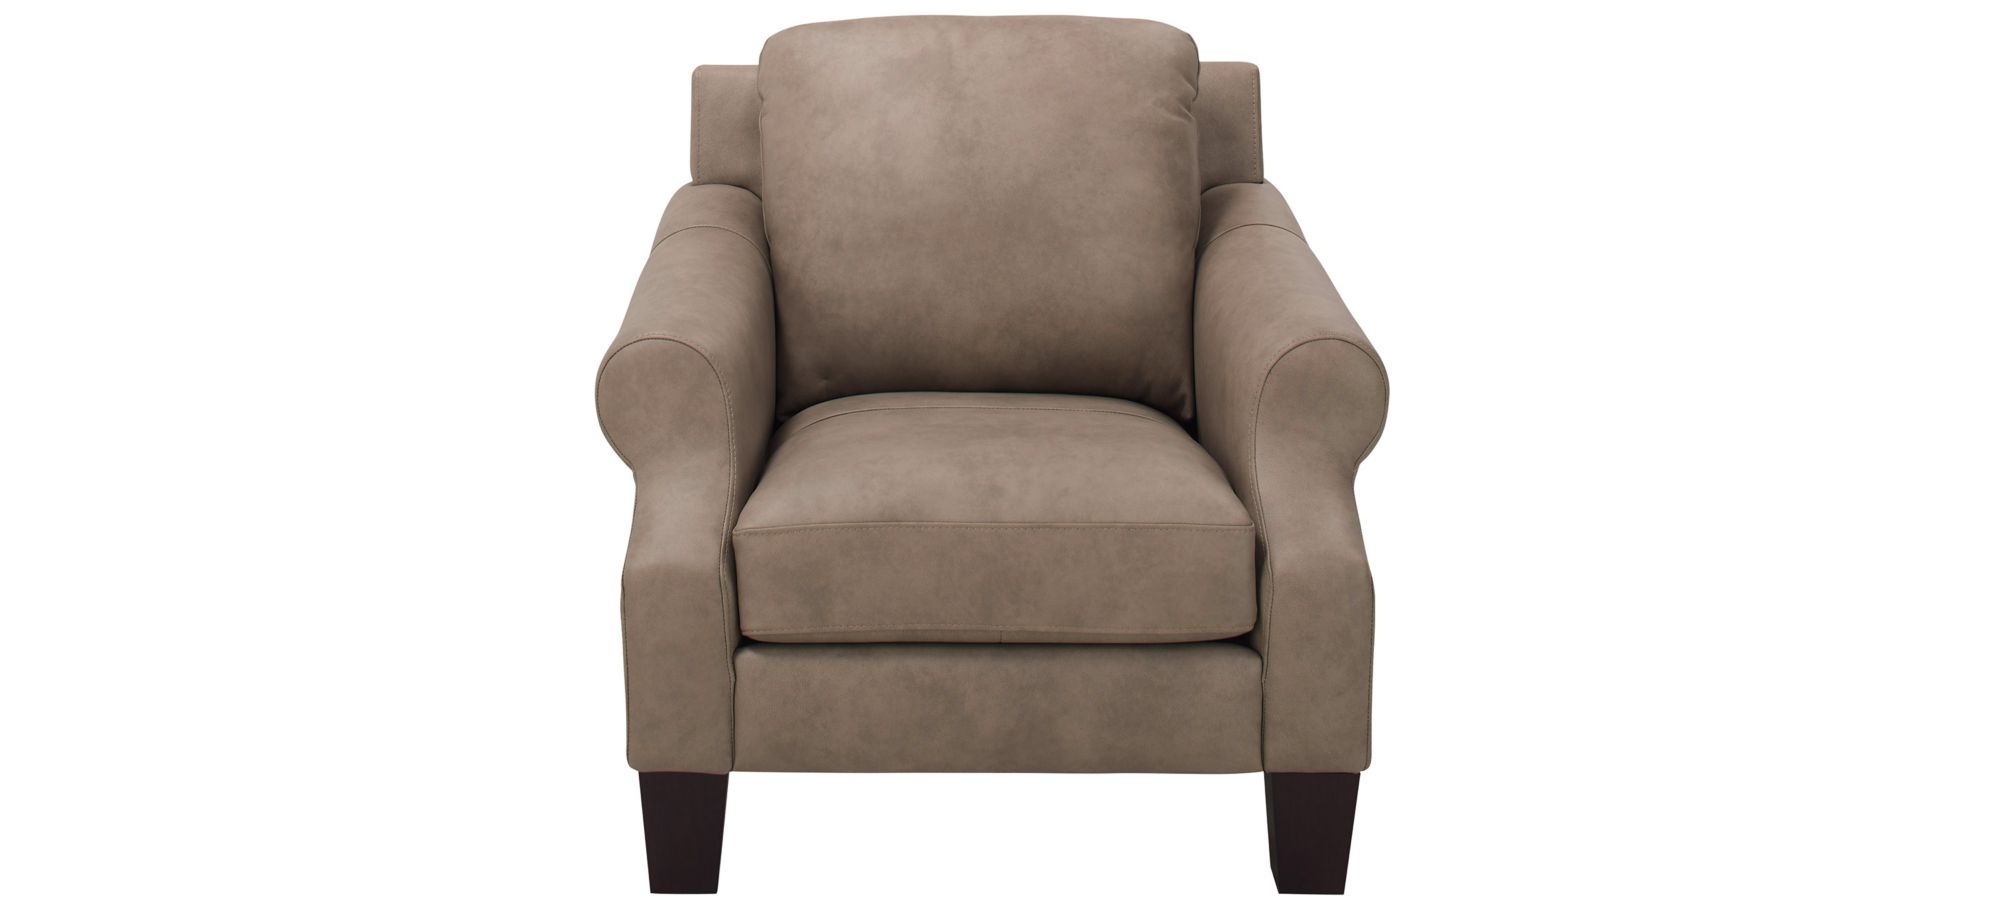 Marlette Leather Chair in Taupe by Bellanest